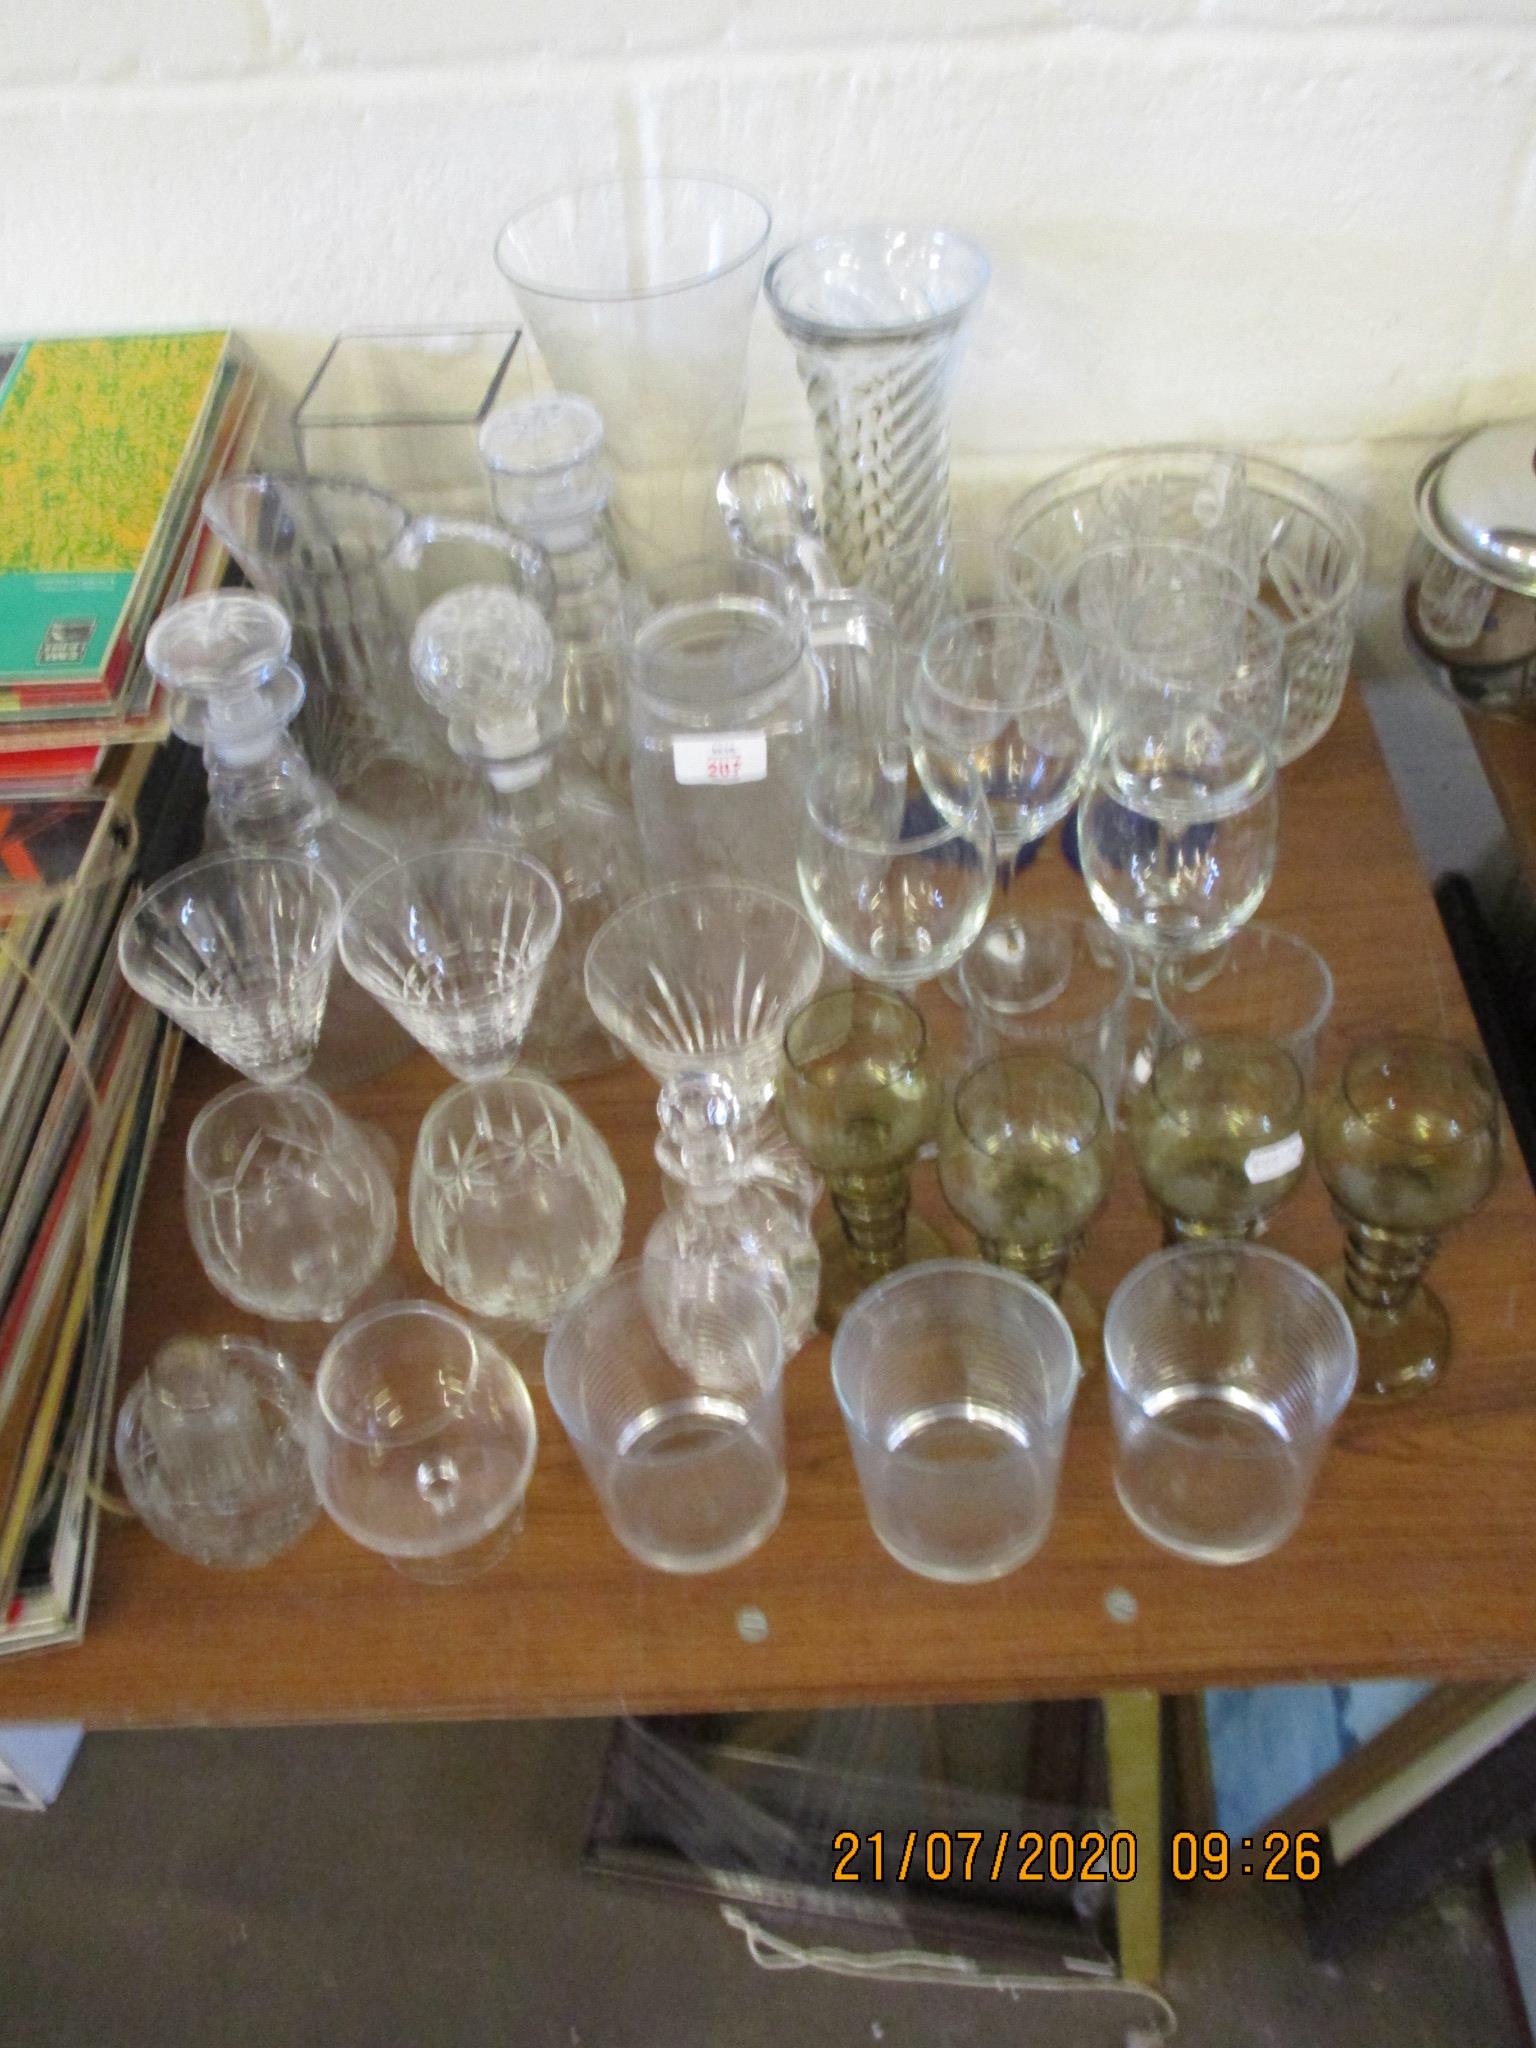 VARIOUS DRINKING GLASSES AND GLASS WARE INCLUDING DECANTERS, VASES ETC